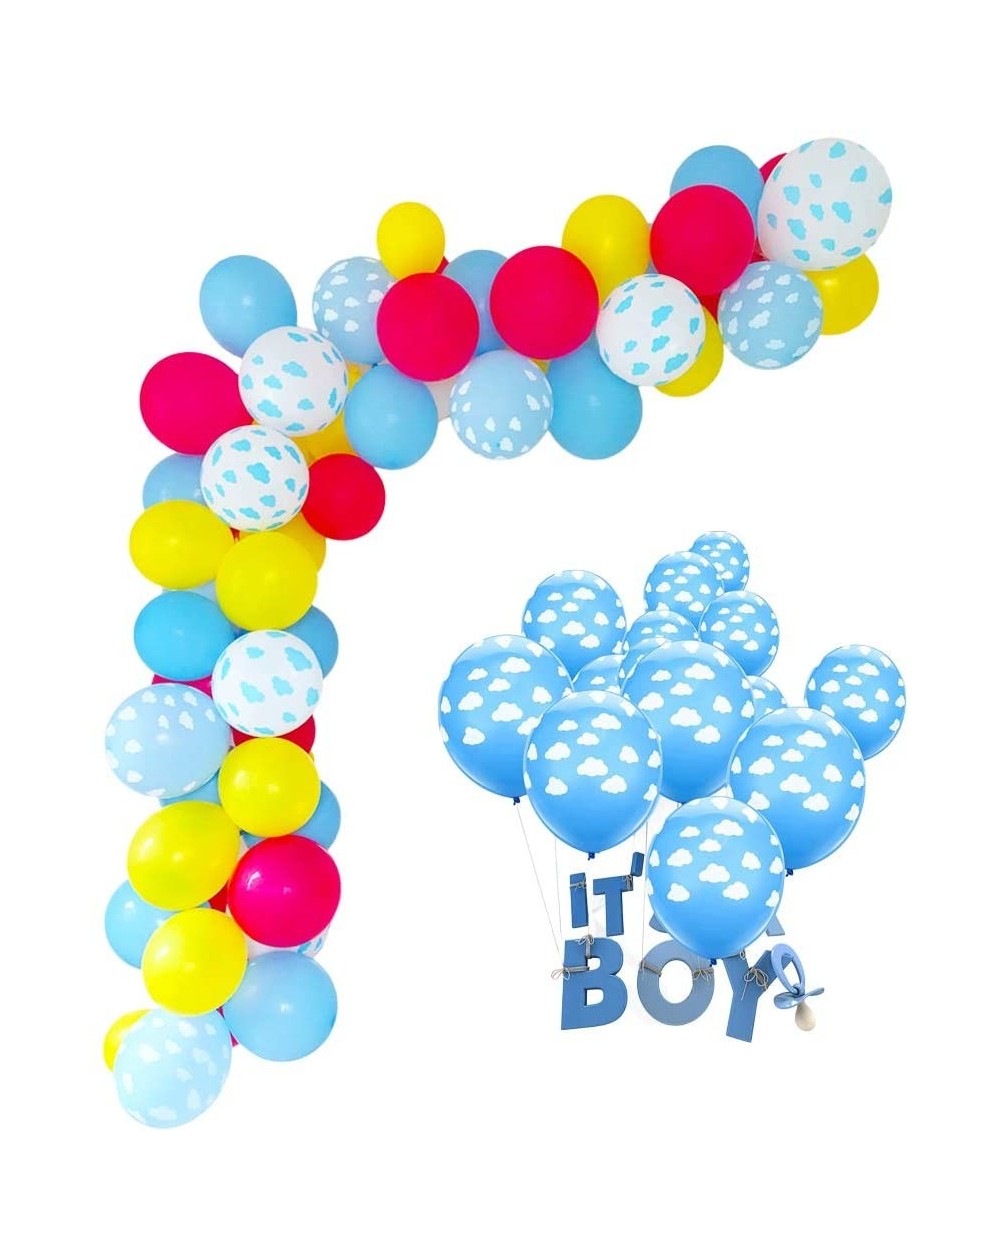 Balloons Toy in Story Party Supplies-Blue Sky and White Clouds Balloons Arch Garland Kit-12inch Blue Red Yellow Balloons Deco...